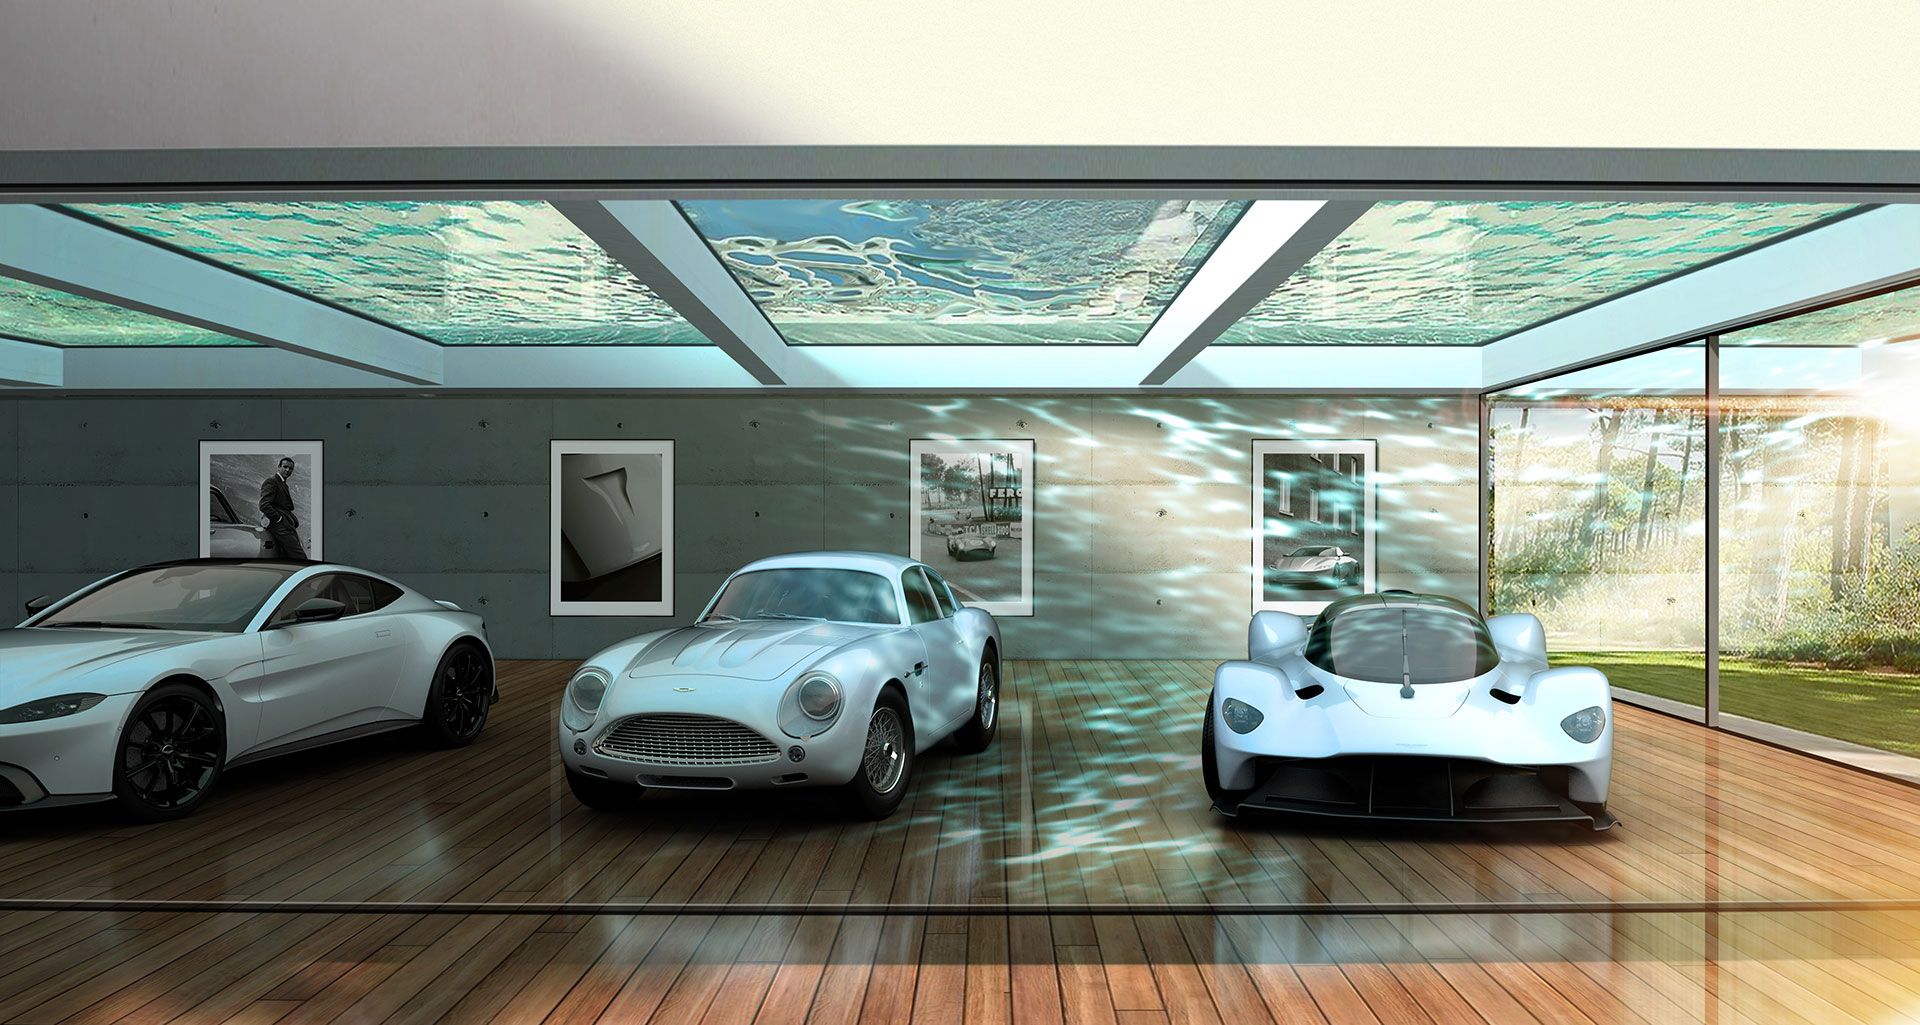 Aston Martin Automotive Galleries and Lairs- evealed at Pebble Beach | FINEST LIVING, the blog of FINEST RESIDENCES